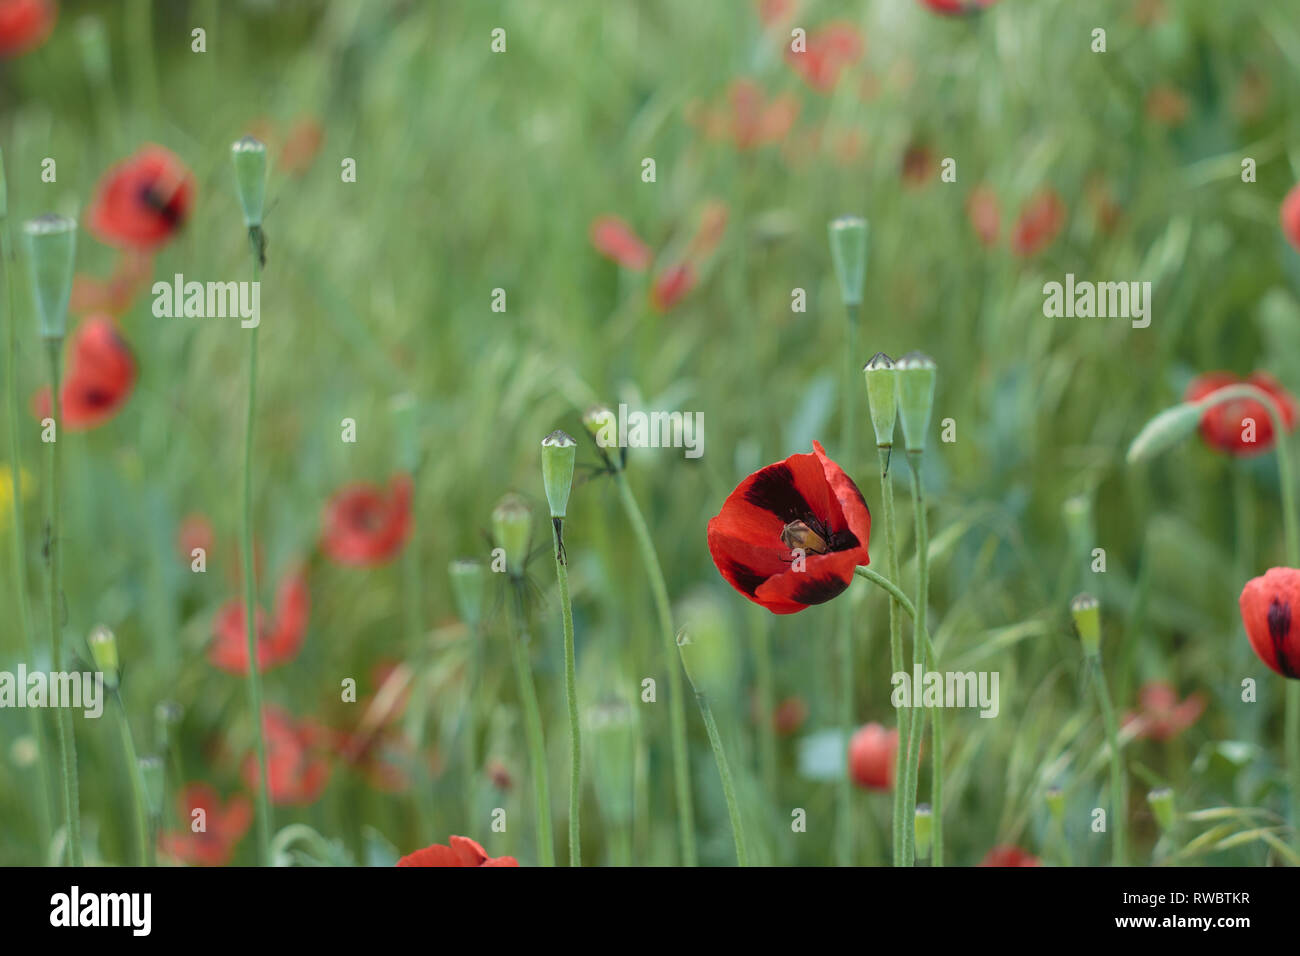 Poppy on the meadow at the daylight. Lonely Poppy flower in a daylight. Poppy flower photography outdoor Stock Photo